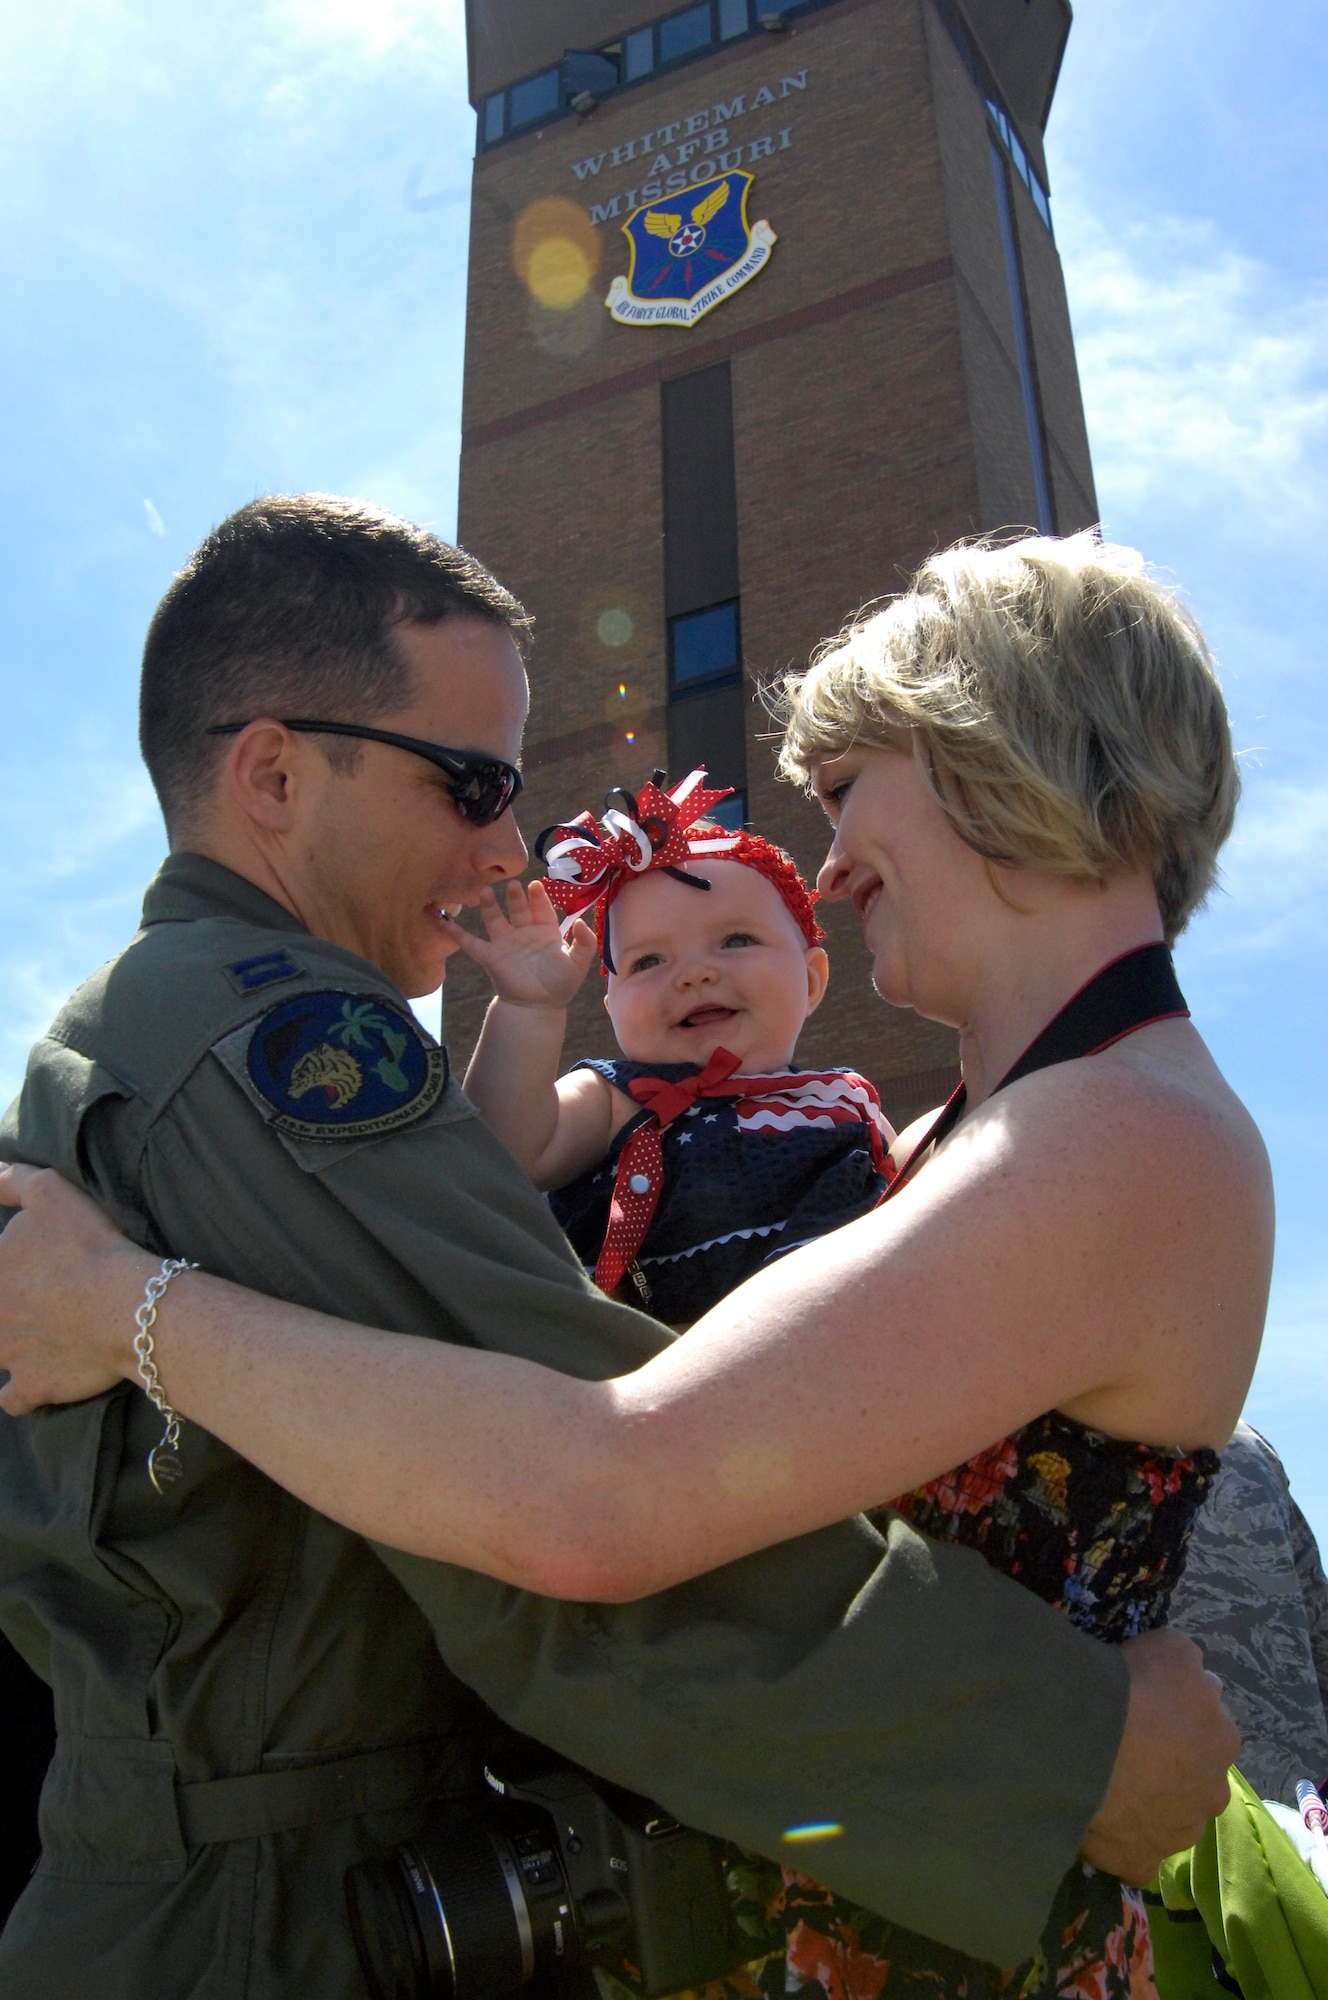 WHITEMAN AIR FORCE BASE, Mo. - Capt. Brian Palmer, 393rd Bomb Squadron, embraces his wife, Michelle, and 7-month-old daughter, Dulaney, June 4 upon returning from a four-month deployment to Andersen Air Force Base, Guam. More than 200 Airmen deployed in support of the B-2 Spirit's continuing bomber presence in the Pacific. (U.S. Air Force photo/Senior Airman Jason Barebo)